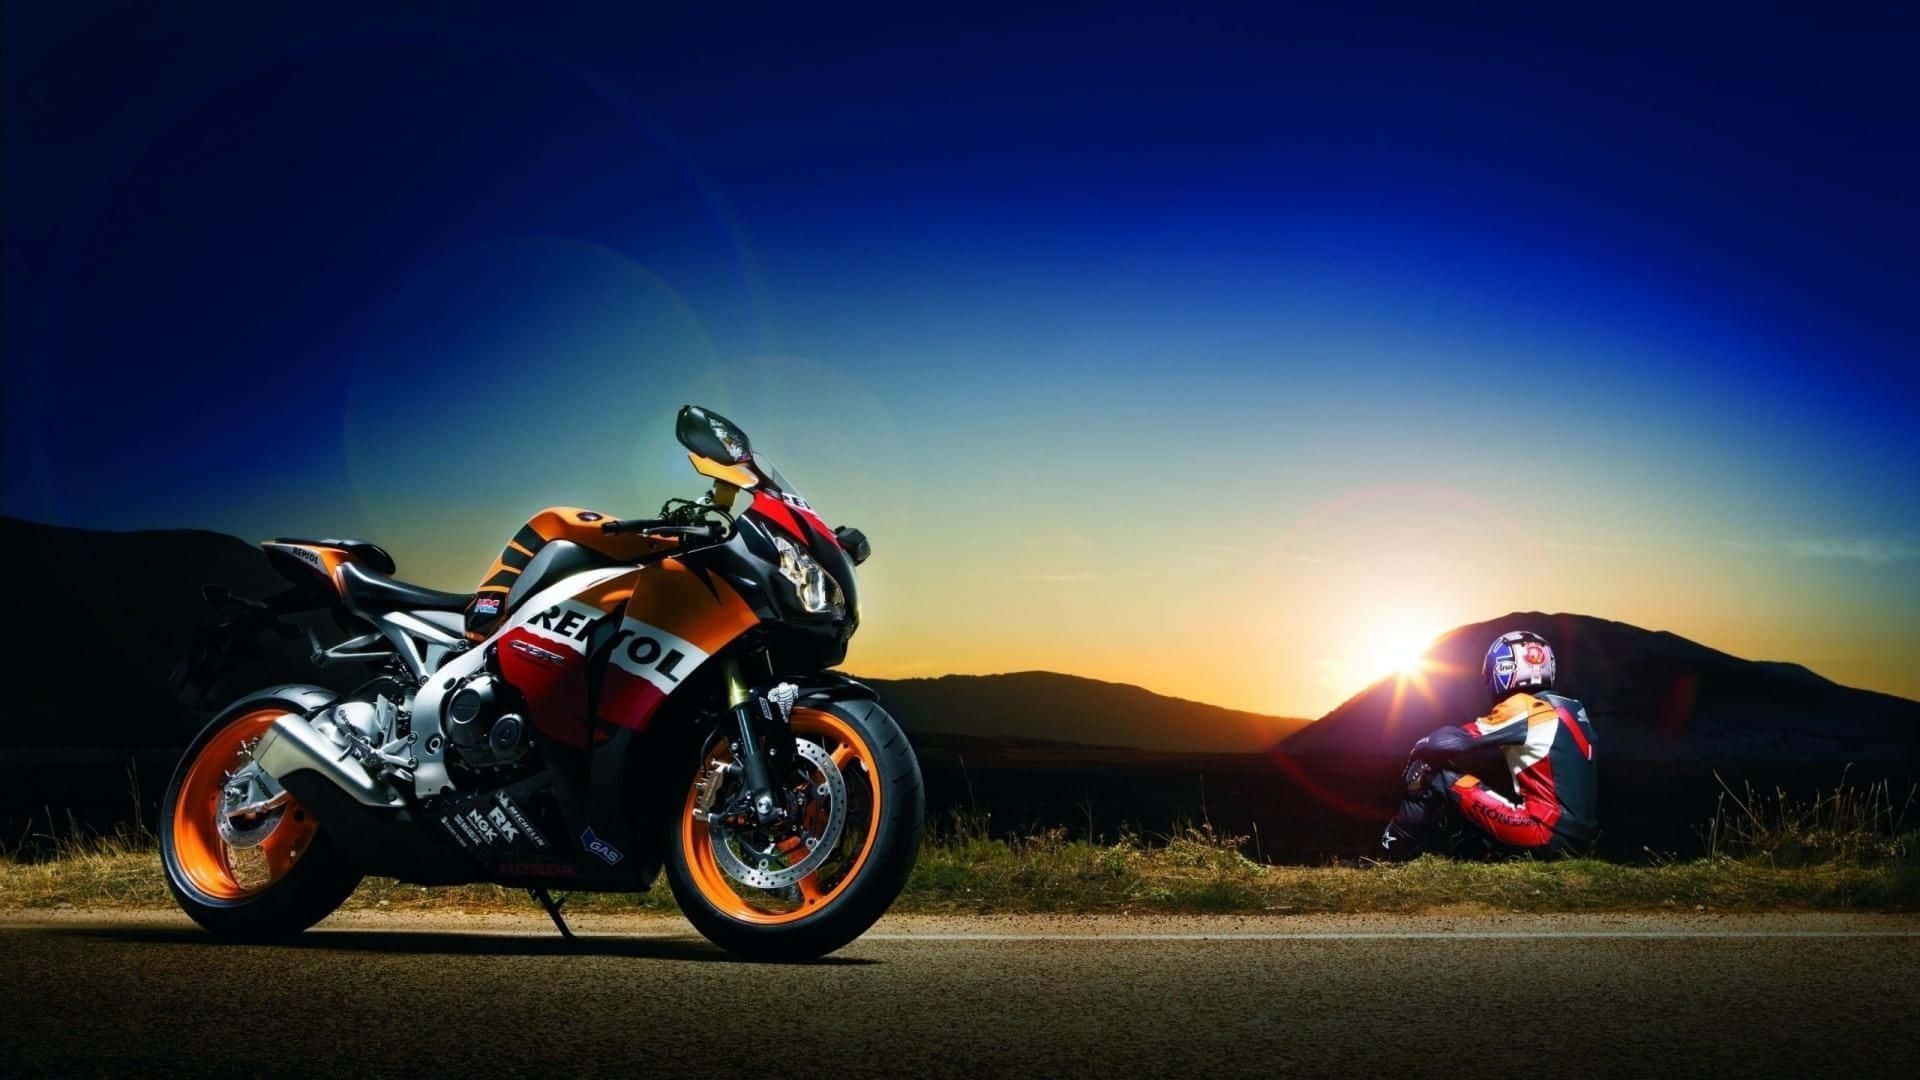 "Discover the adrenaline rush of taking a ride on HD Bikes!"